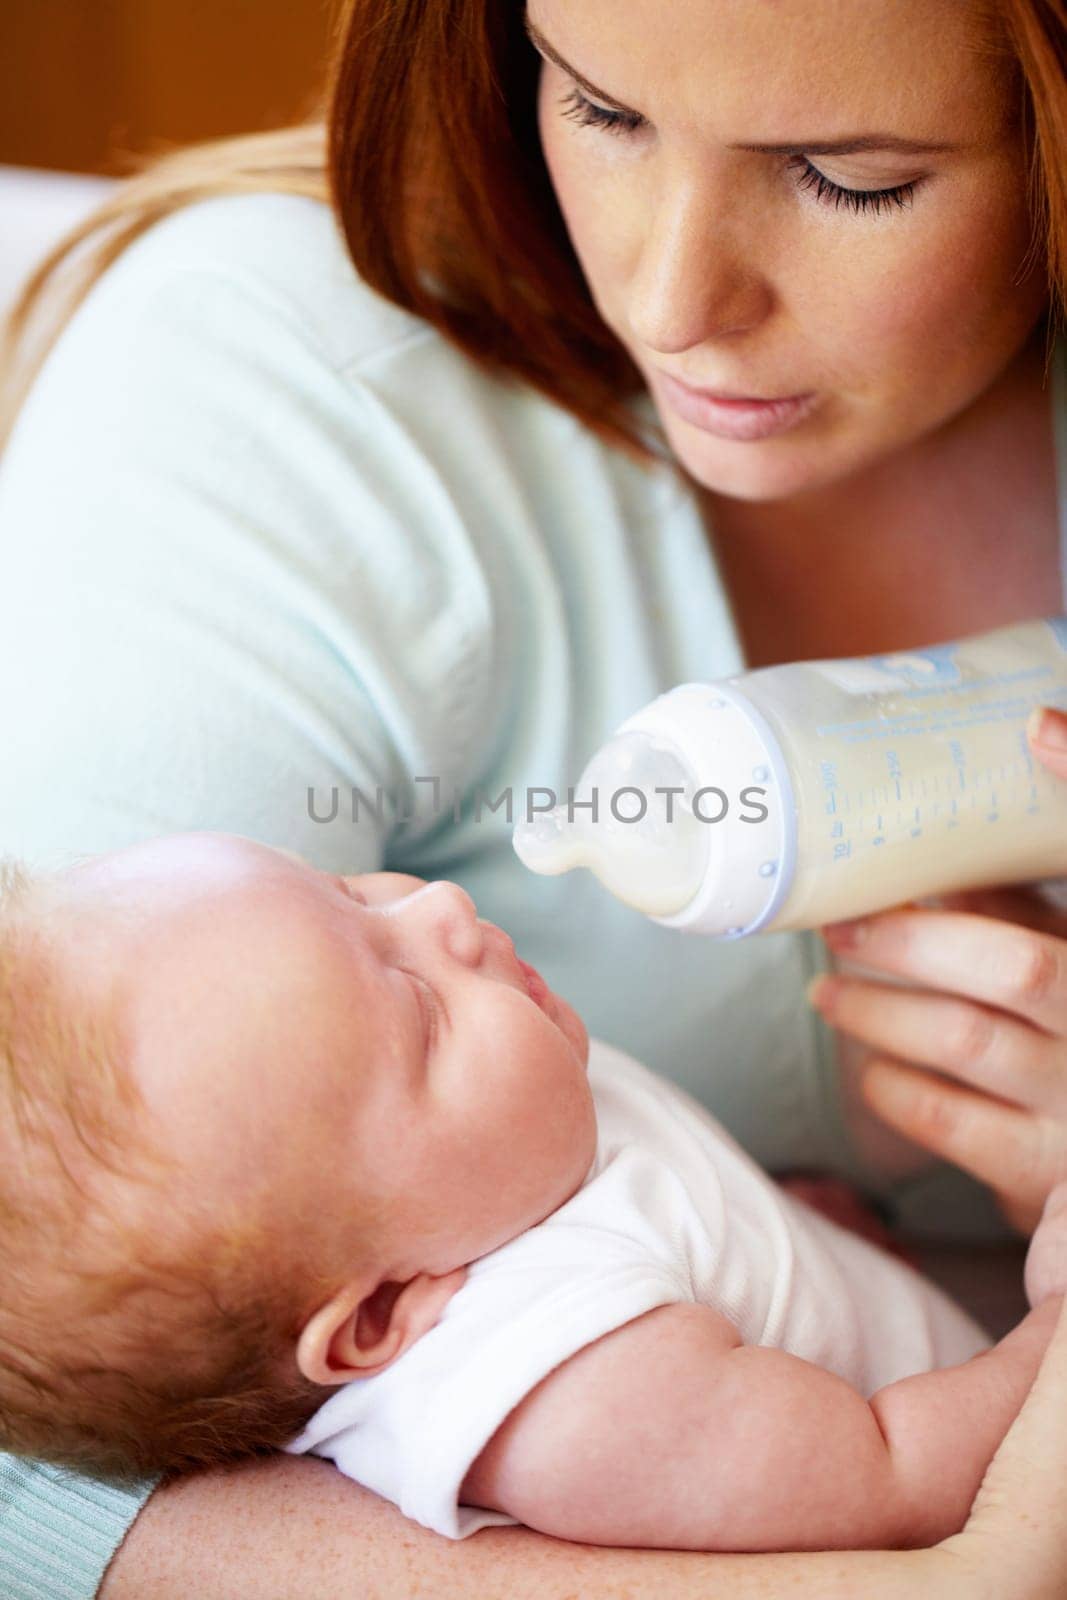 Mom, milk and feed baby from bottle for nutrition, healthy breakfast and diet in the morning. Mother, child and feeding newborn formula food for growth, development and wellness together in home